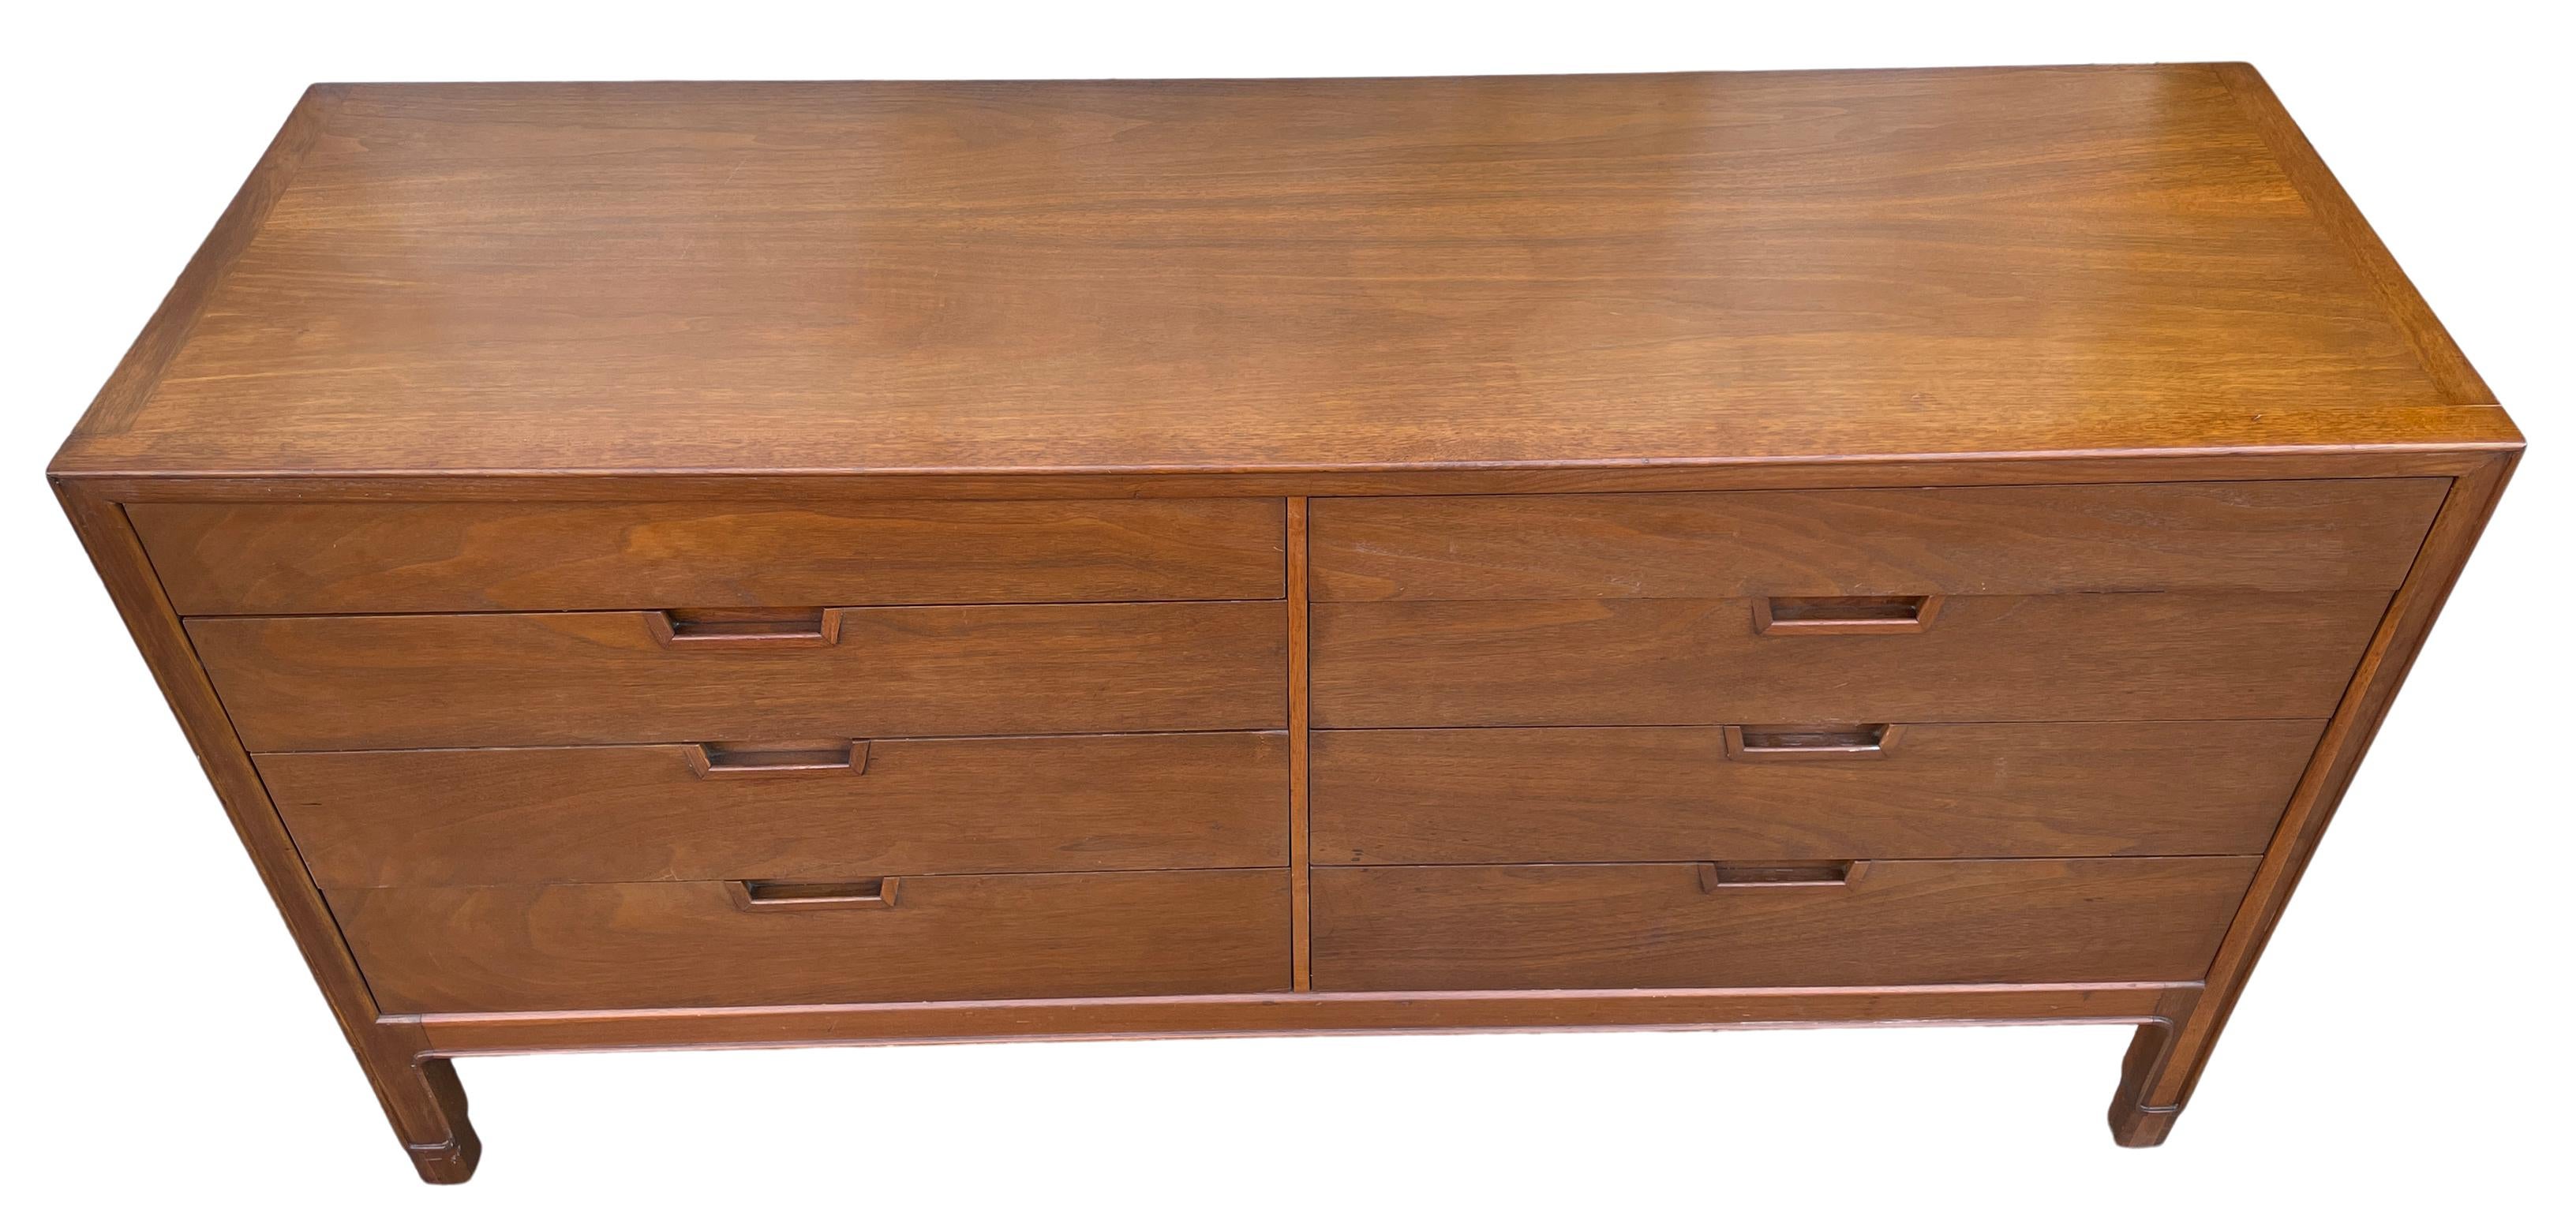 Mid-Century Modern American 8 drawer dresser by Janus. Great walnut 8 drawer dresser - solid wood construction. Beautiful Carved handles all drawers slide smooth - clean inside and out. Great American Designed Dresser. Located In Brooklyn NYC.